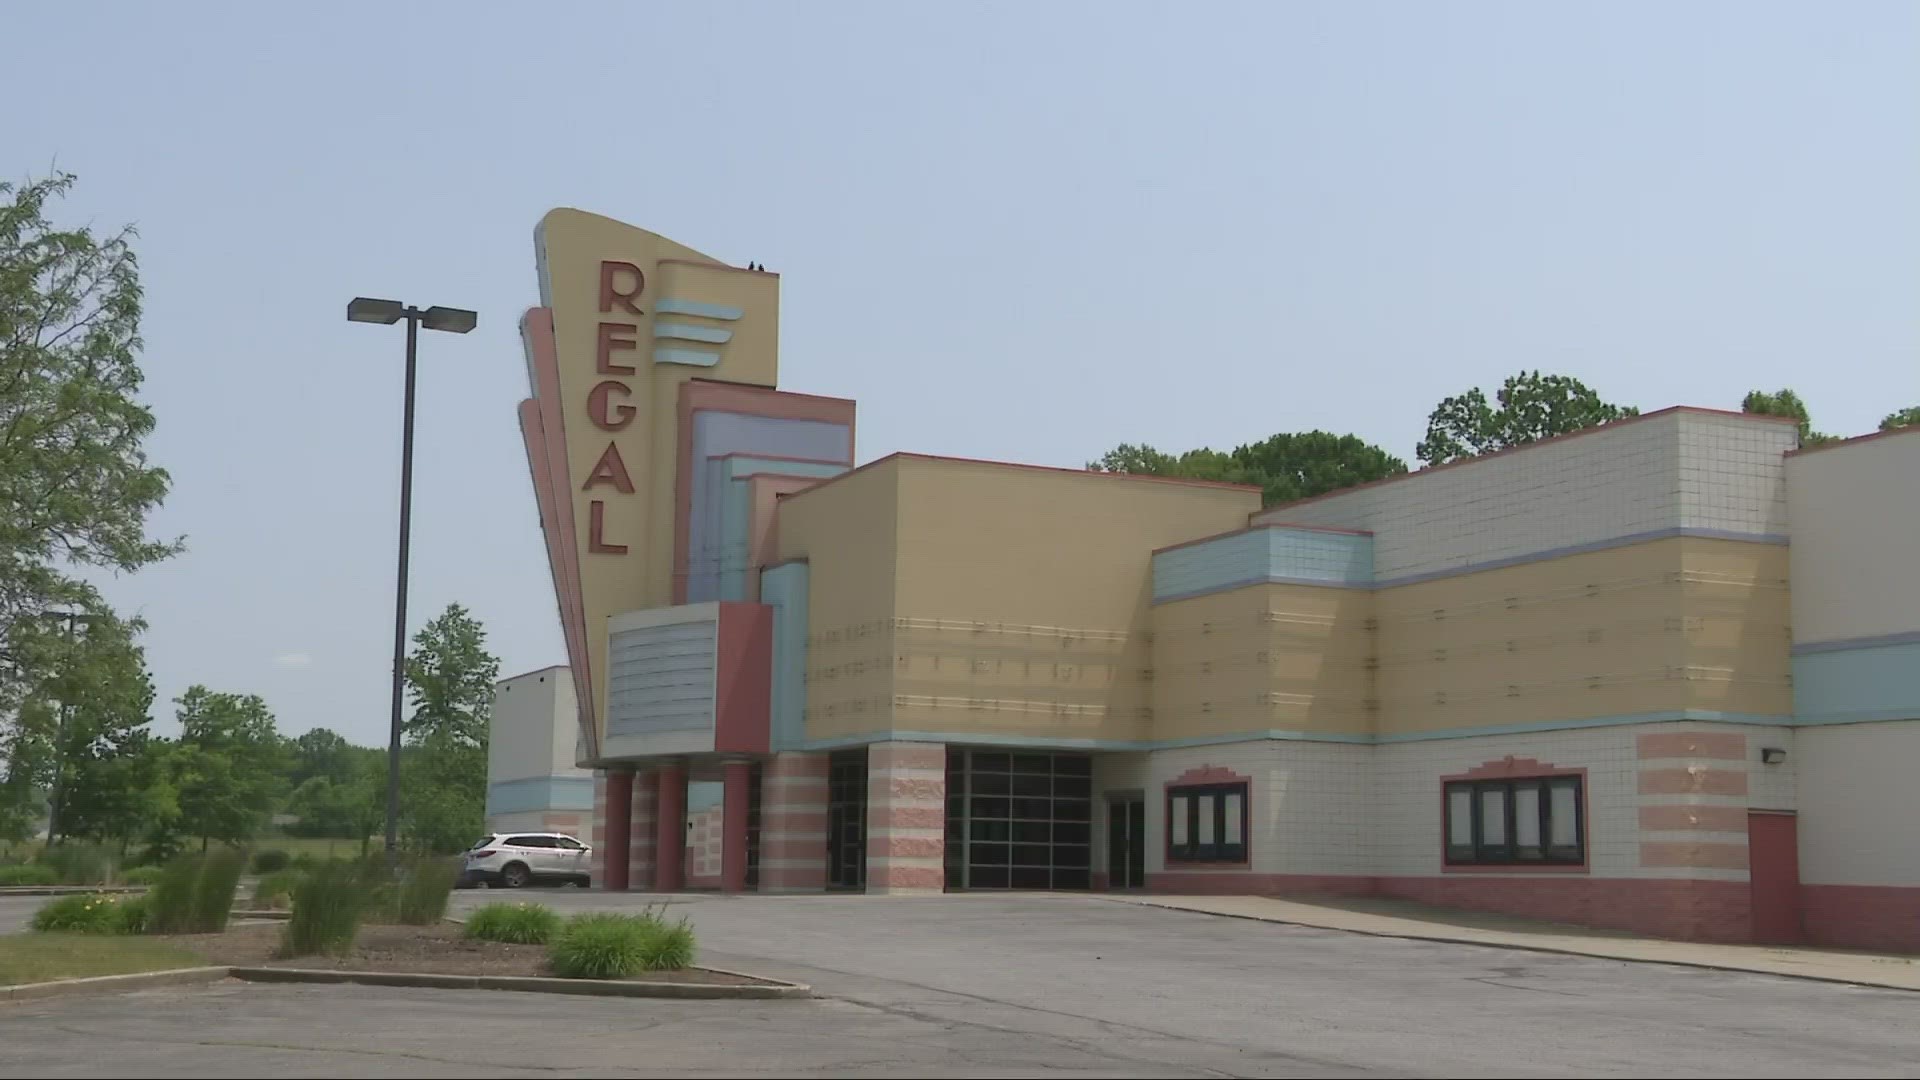 The Regal Cinemas location in Akron was located just off I-77 and Arlington Road.